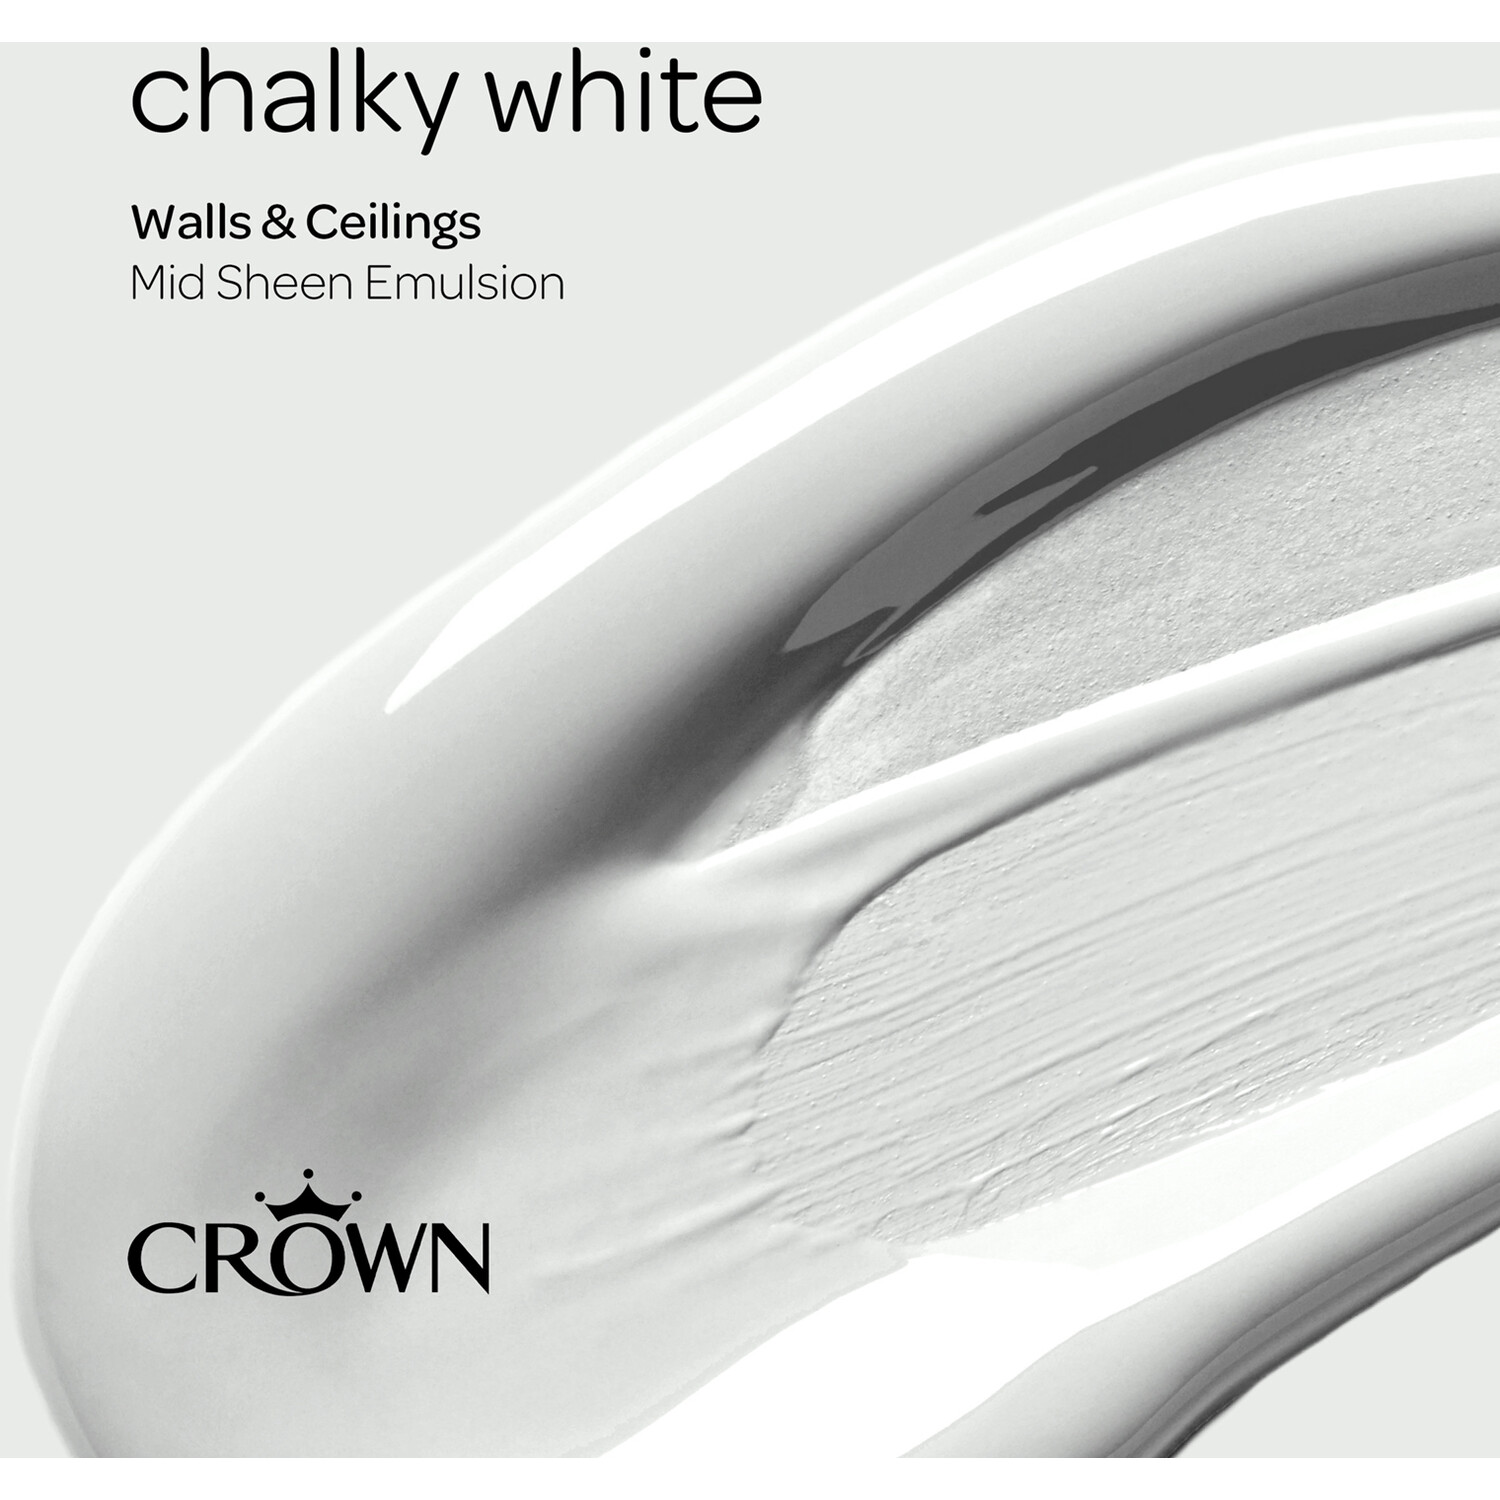 Crown Walls & Ceilings Chalky White Mid Sheen Emulsion Paint 2.5L Image 4